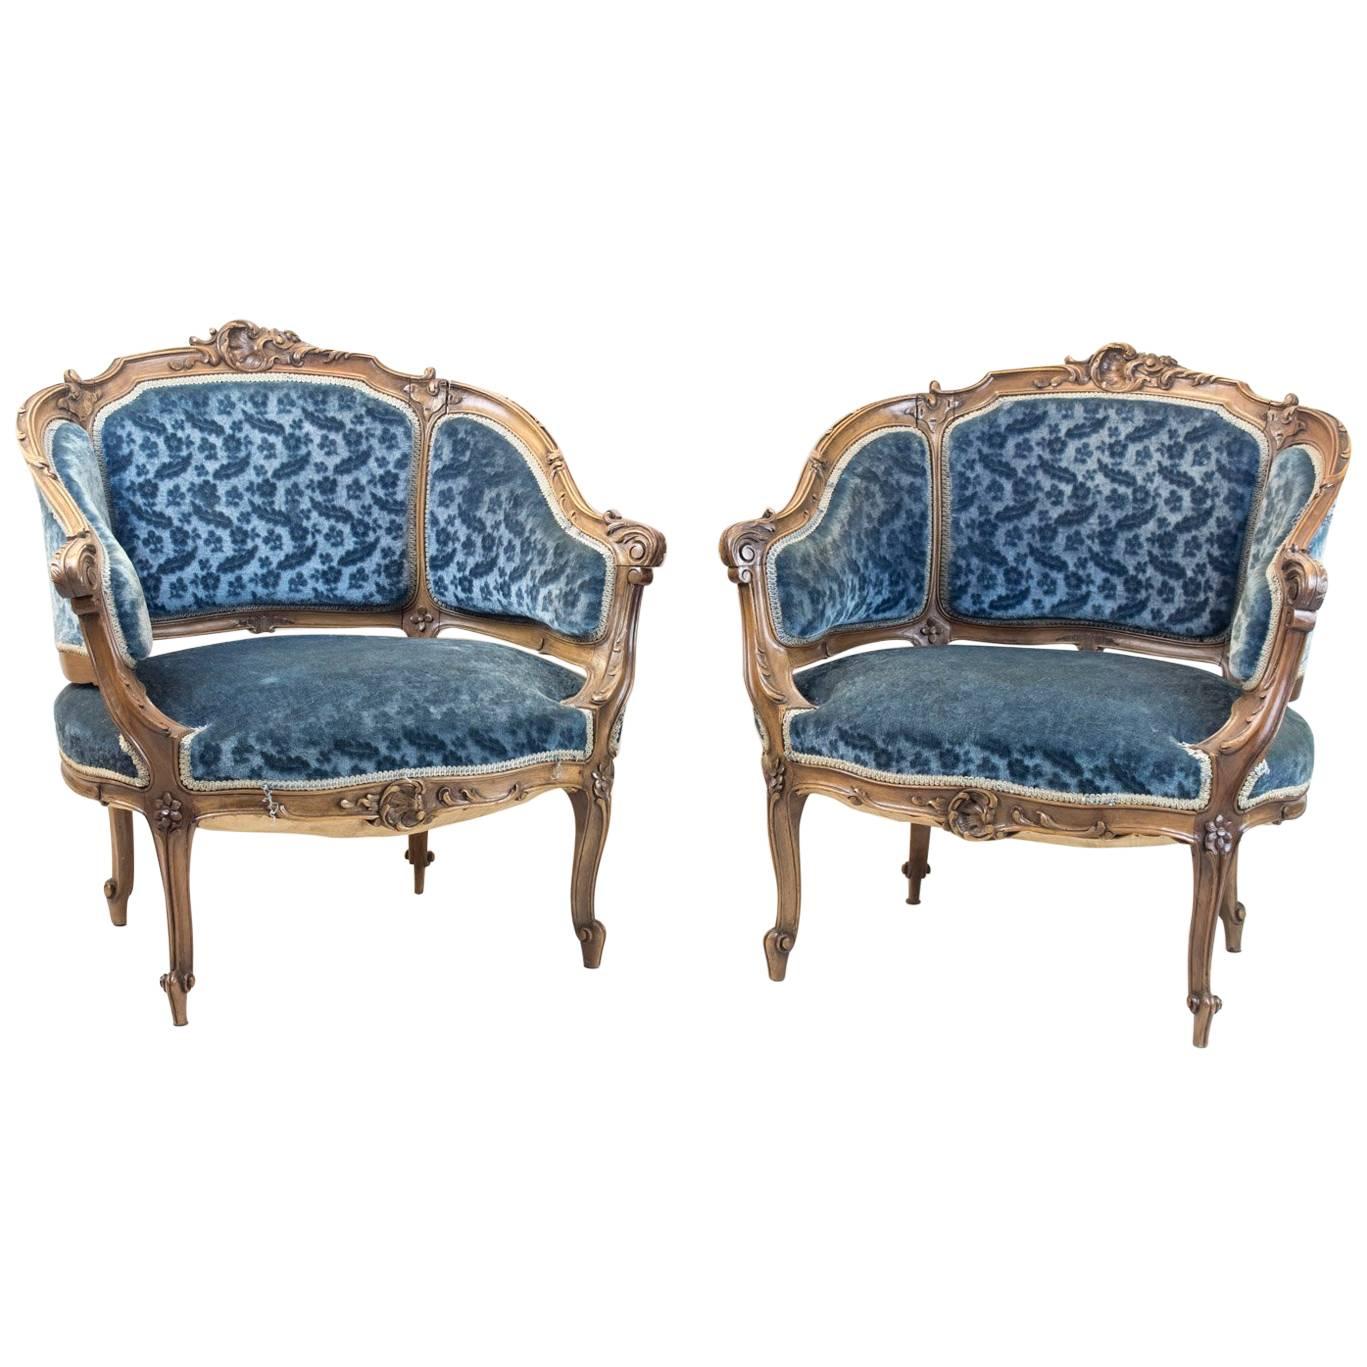 Pair of Rocaille Style Bergere Armchairs, Blue Velvet Trim, Napoleon III Period